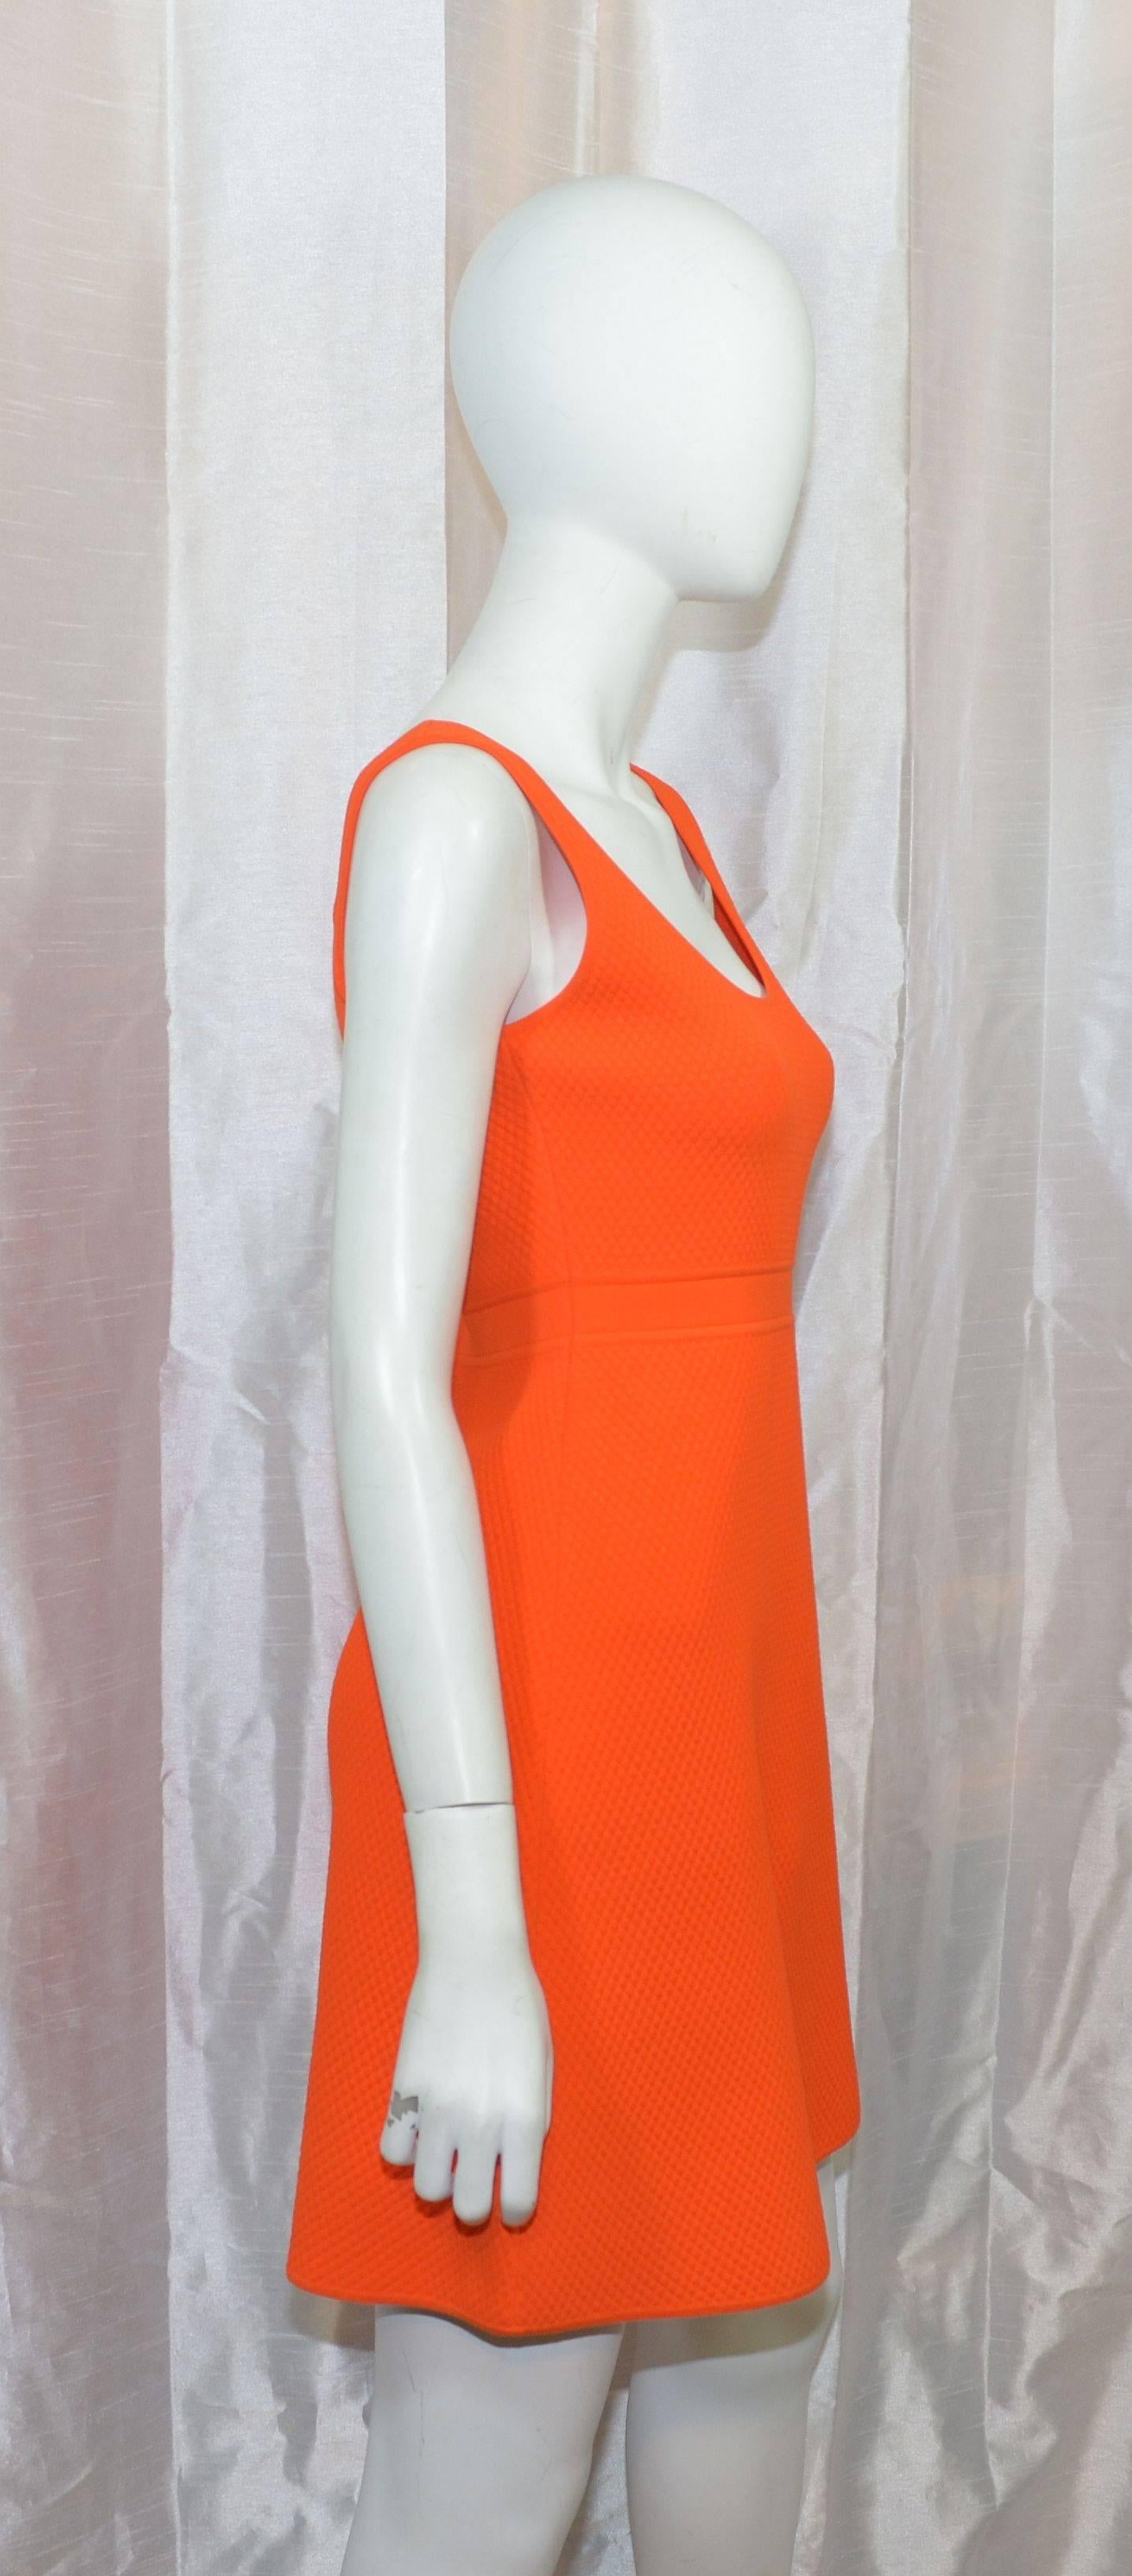 Gucci dress featured in a bright orange waffle knit fabric with a side zipper closure. Dress is a size Medium and made in Italy. 52% rayon, 46% nylon, and 2% elastane. 

Measurements:
bust - 32''
waist - 28''
hips - 36''
length - 29''